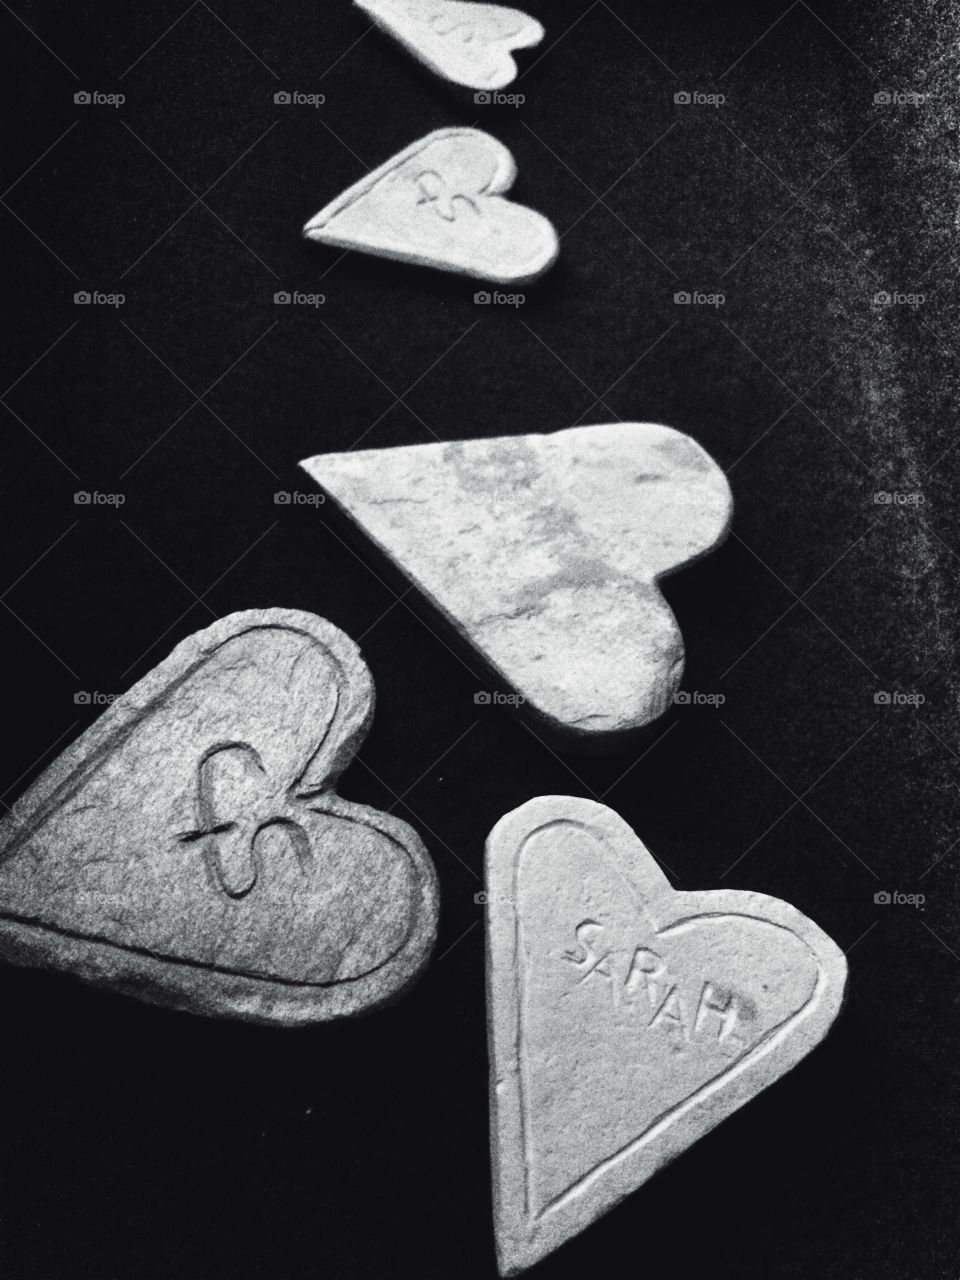 Etched hearts